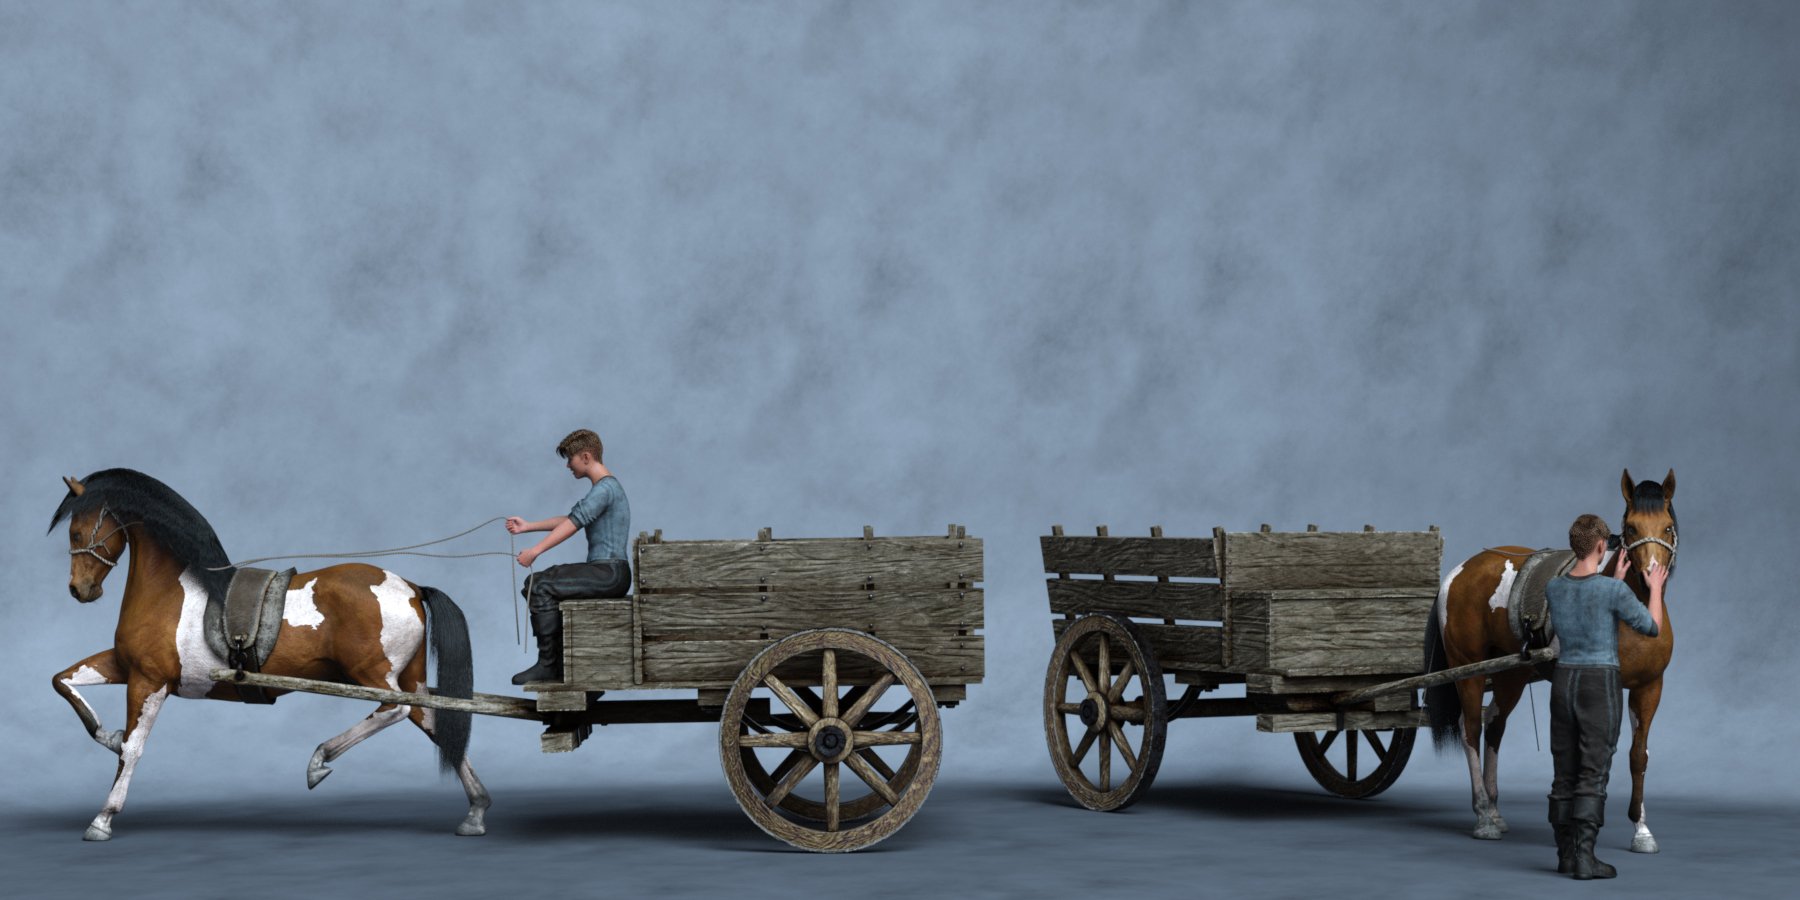 Old Cart Walk Poses for Genesis 9, Daz Horse 3, and Rustic Cart by: Ensary, 3D Models by Daz 3D